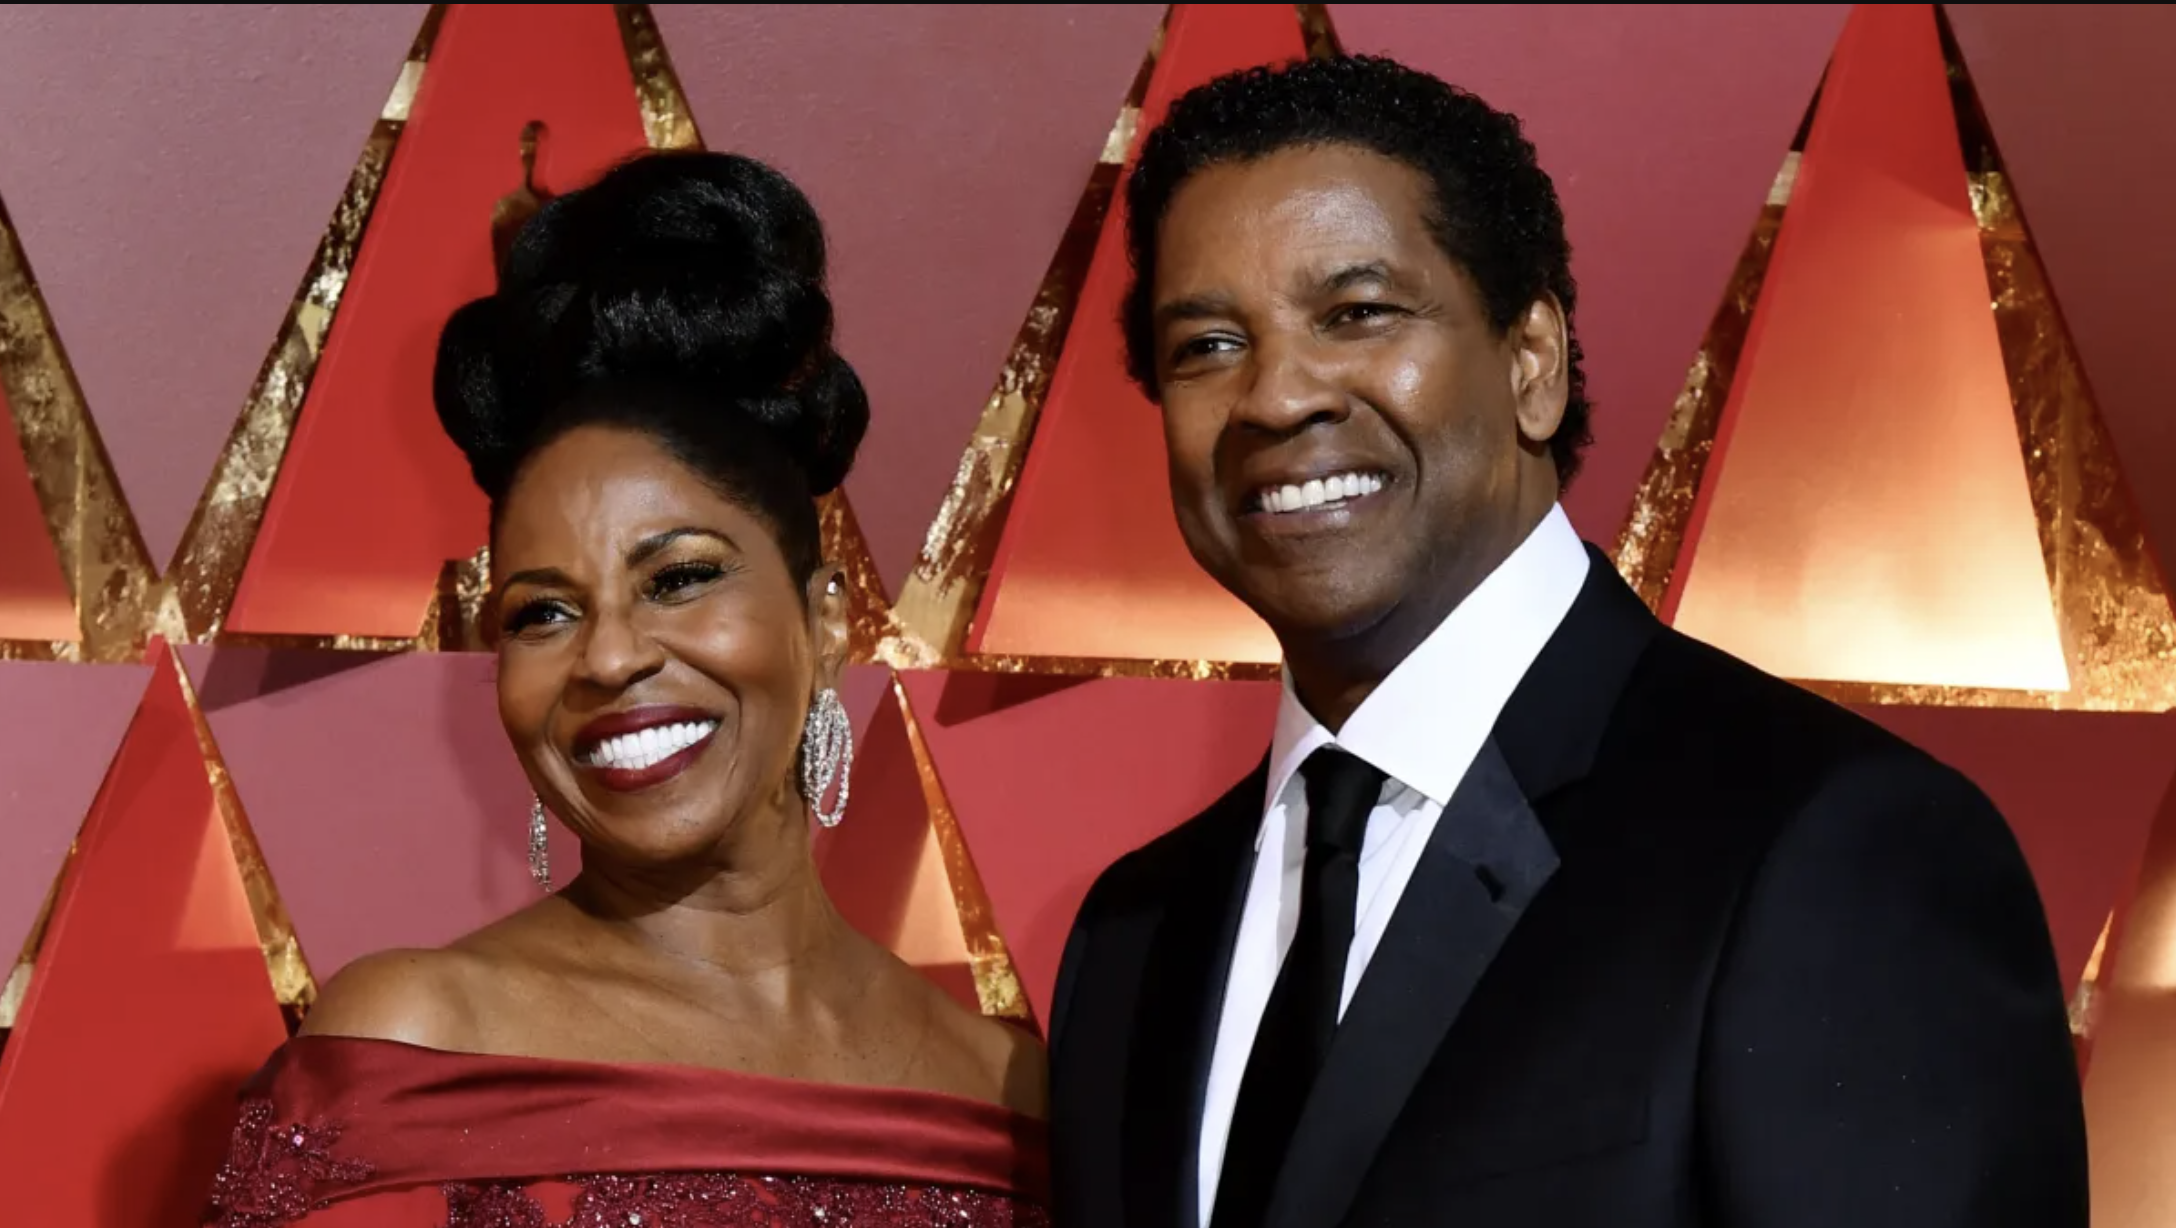 Denzel Washington has expressed that his wife plays a pivotal role in maintaining overall stability.